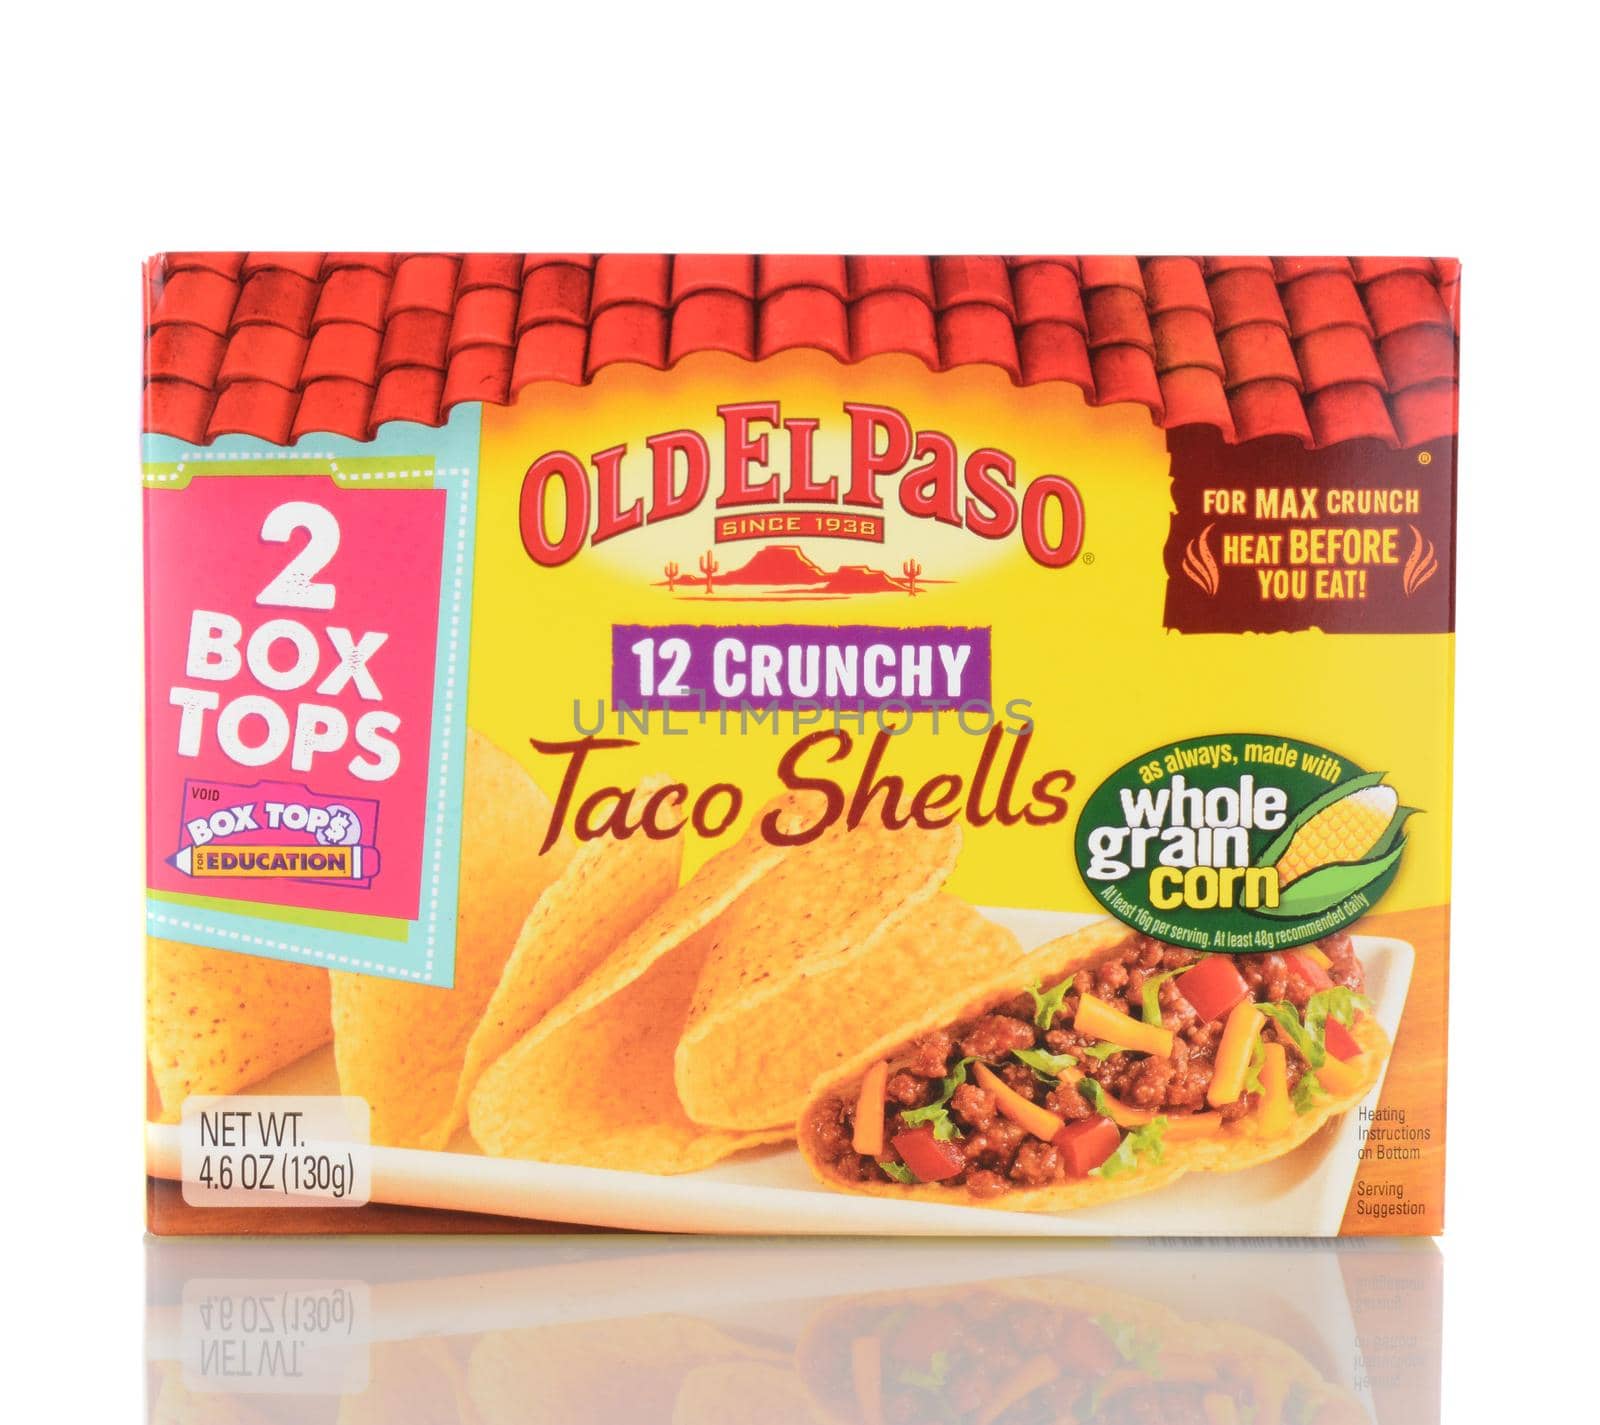 IRVINE, CA - January 05, 2014: Old El Paso Taco Shells. Old El Paso has be making popular Mexican cuisine products since 1938.